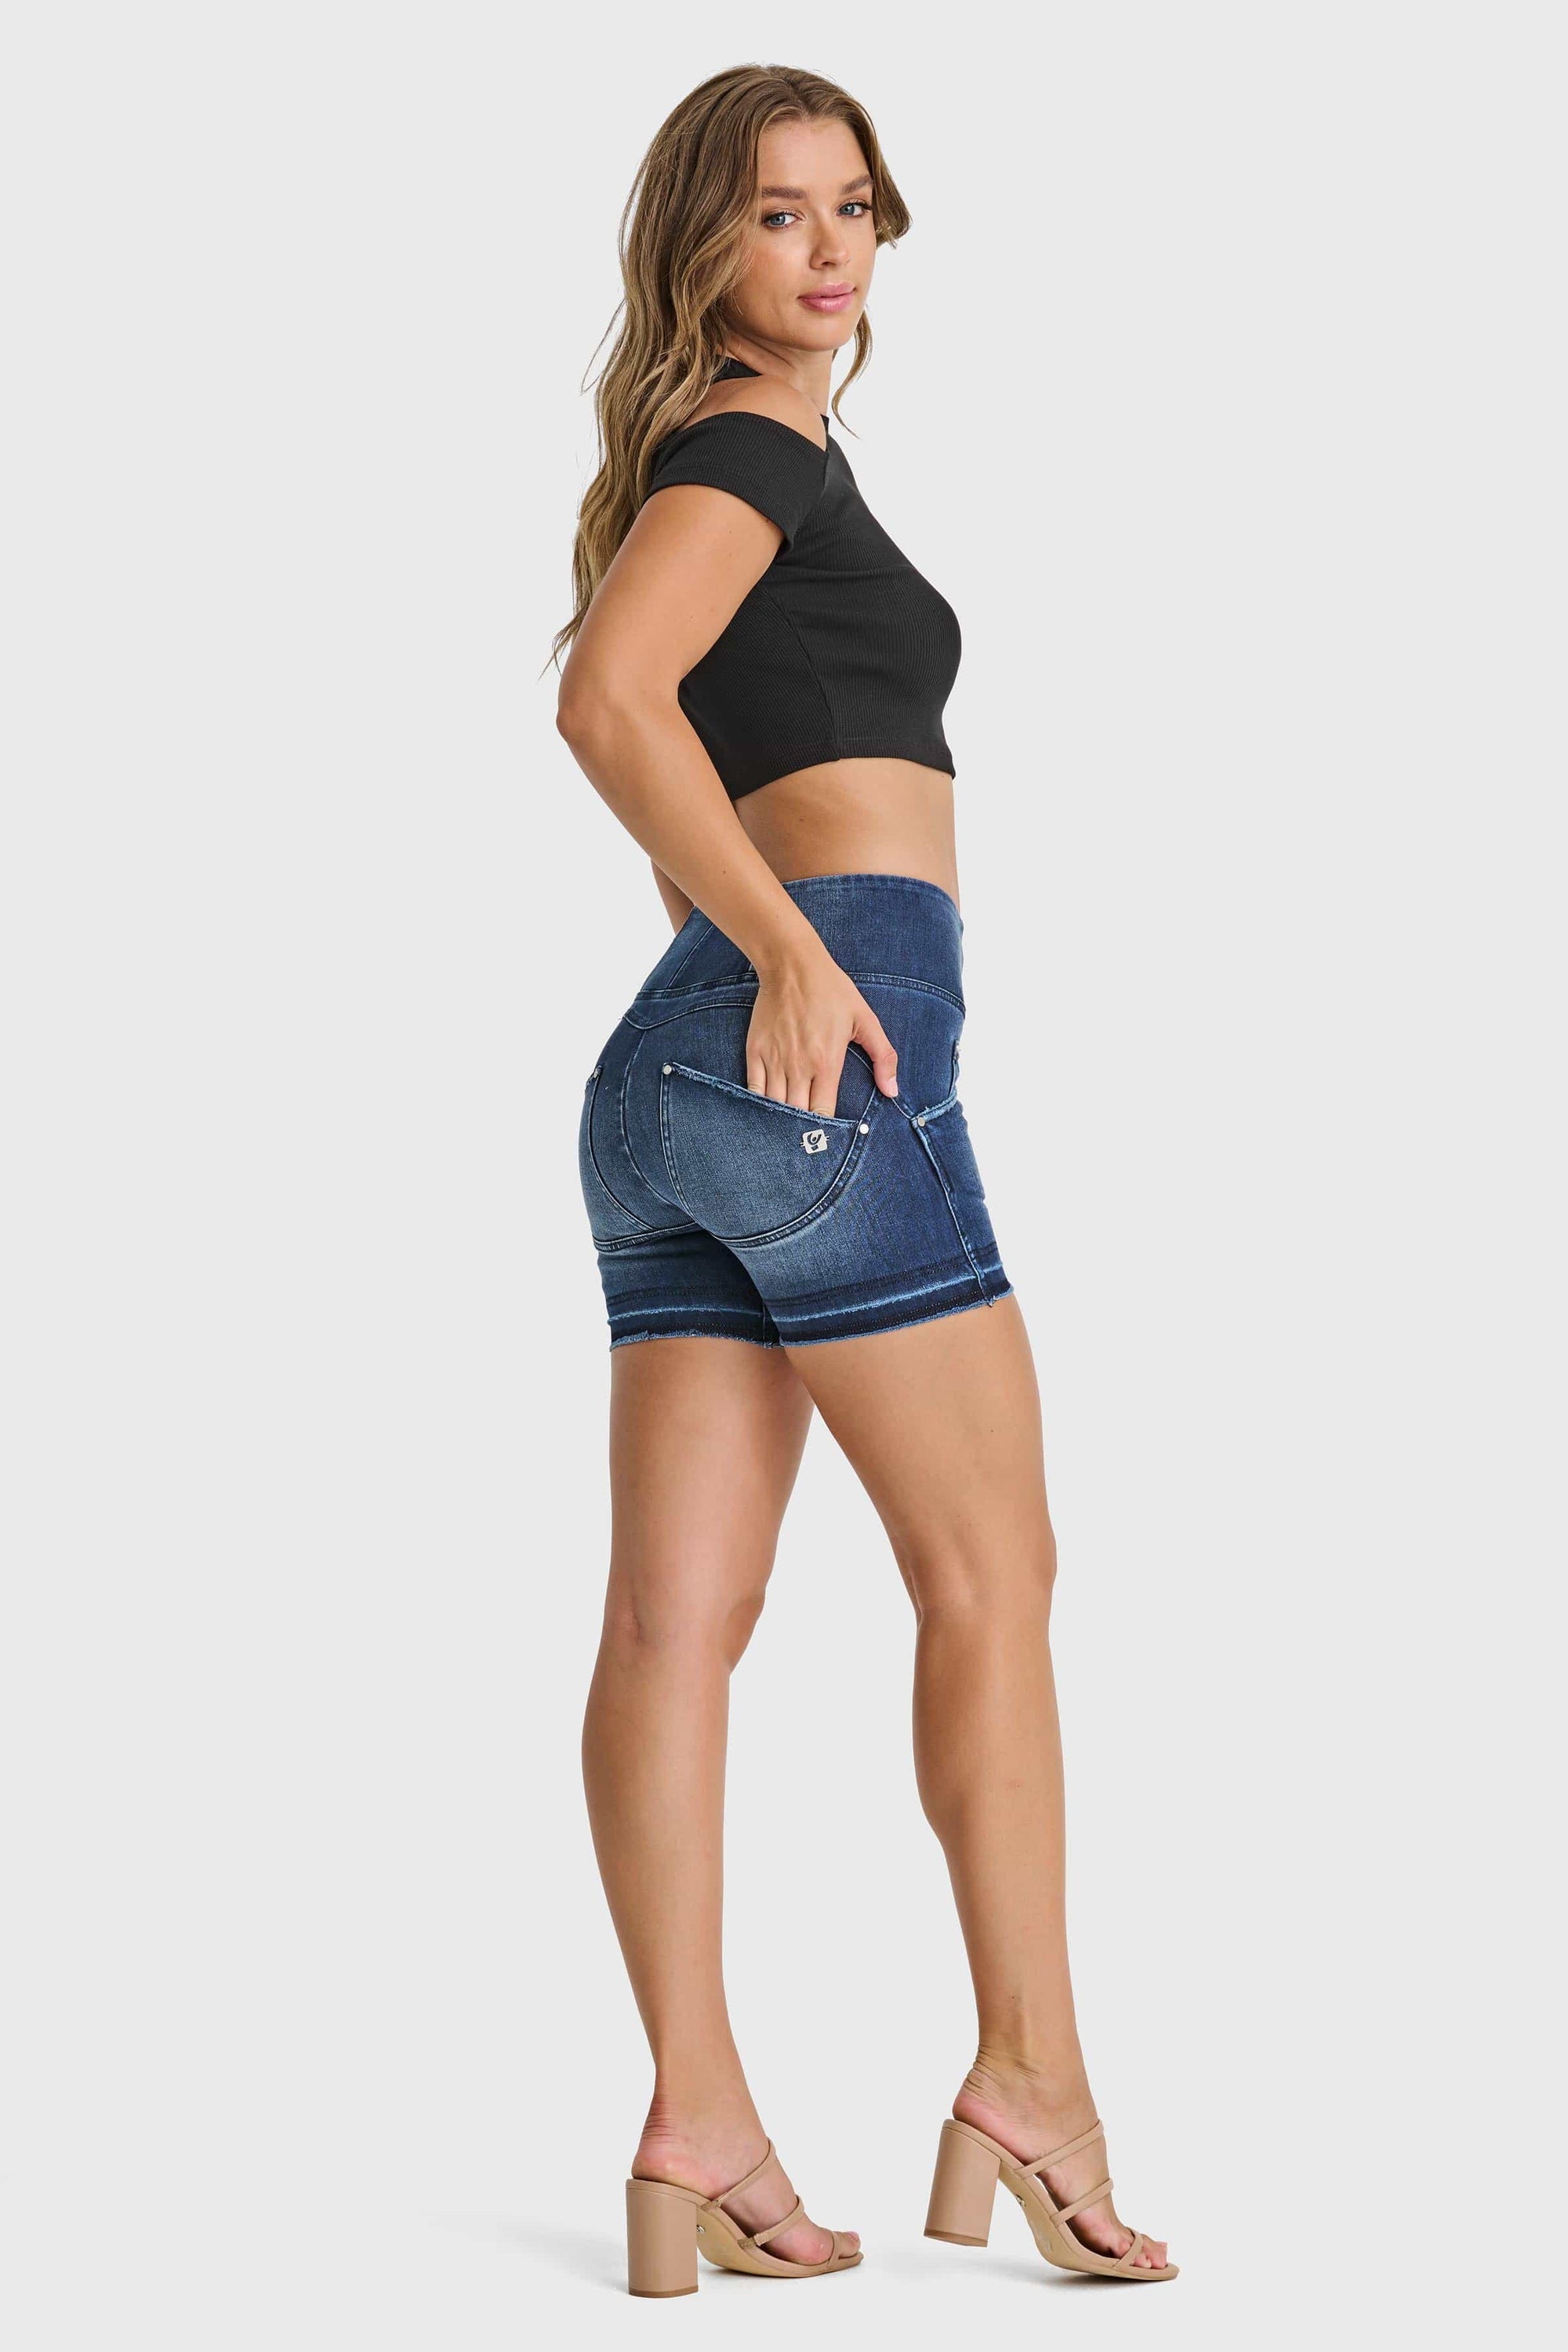 WR.UP® Snug Jeans - Talle alto - Shorts - Azul oscuro + costuras azules 9